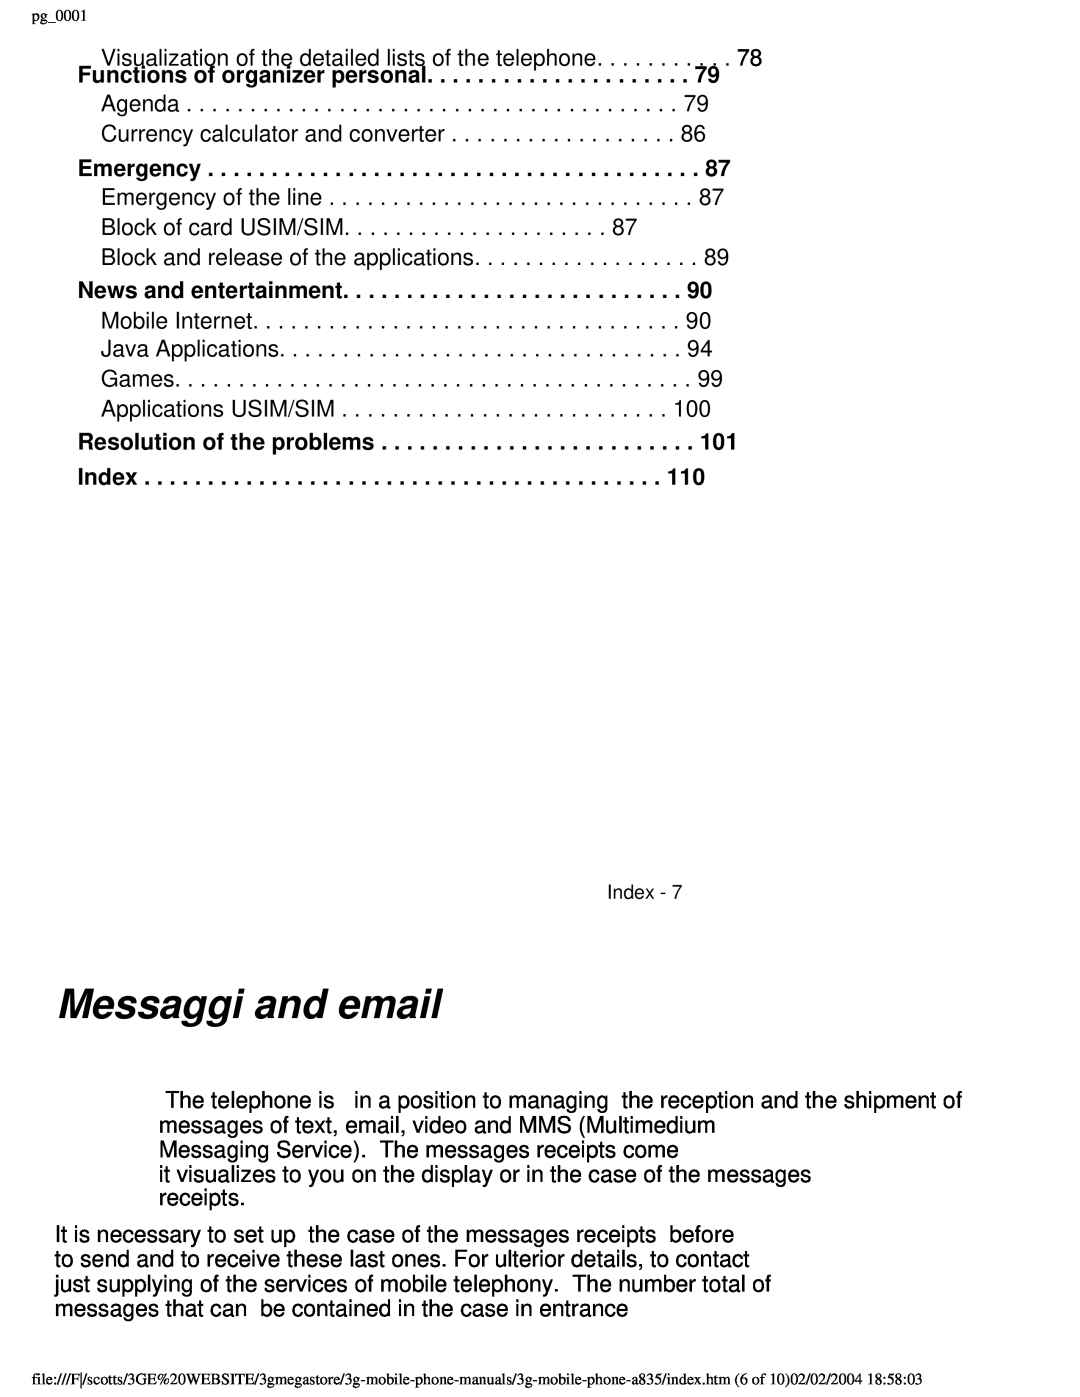 Motorola PG_0001 manual Messaggi and email, Functions of organizer personal, Emergency, News and entertainment 